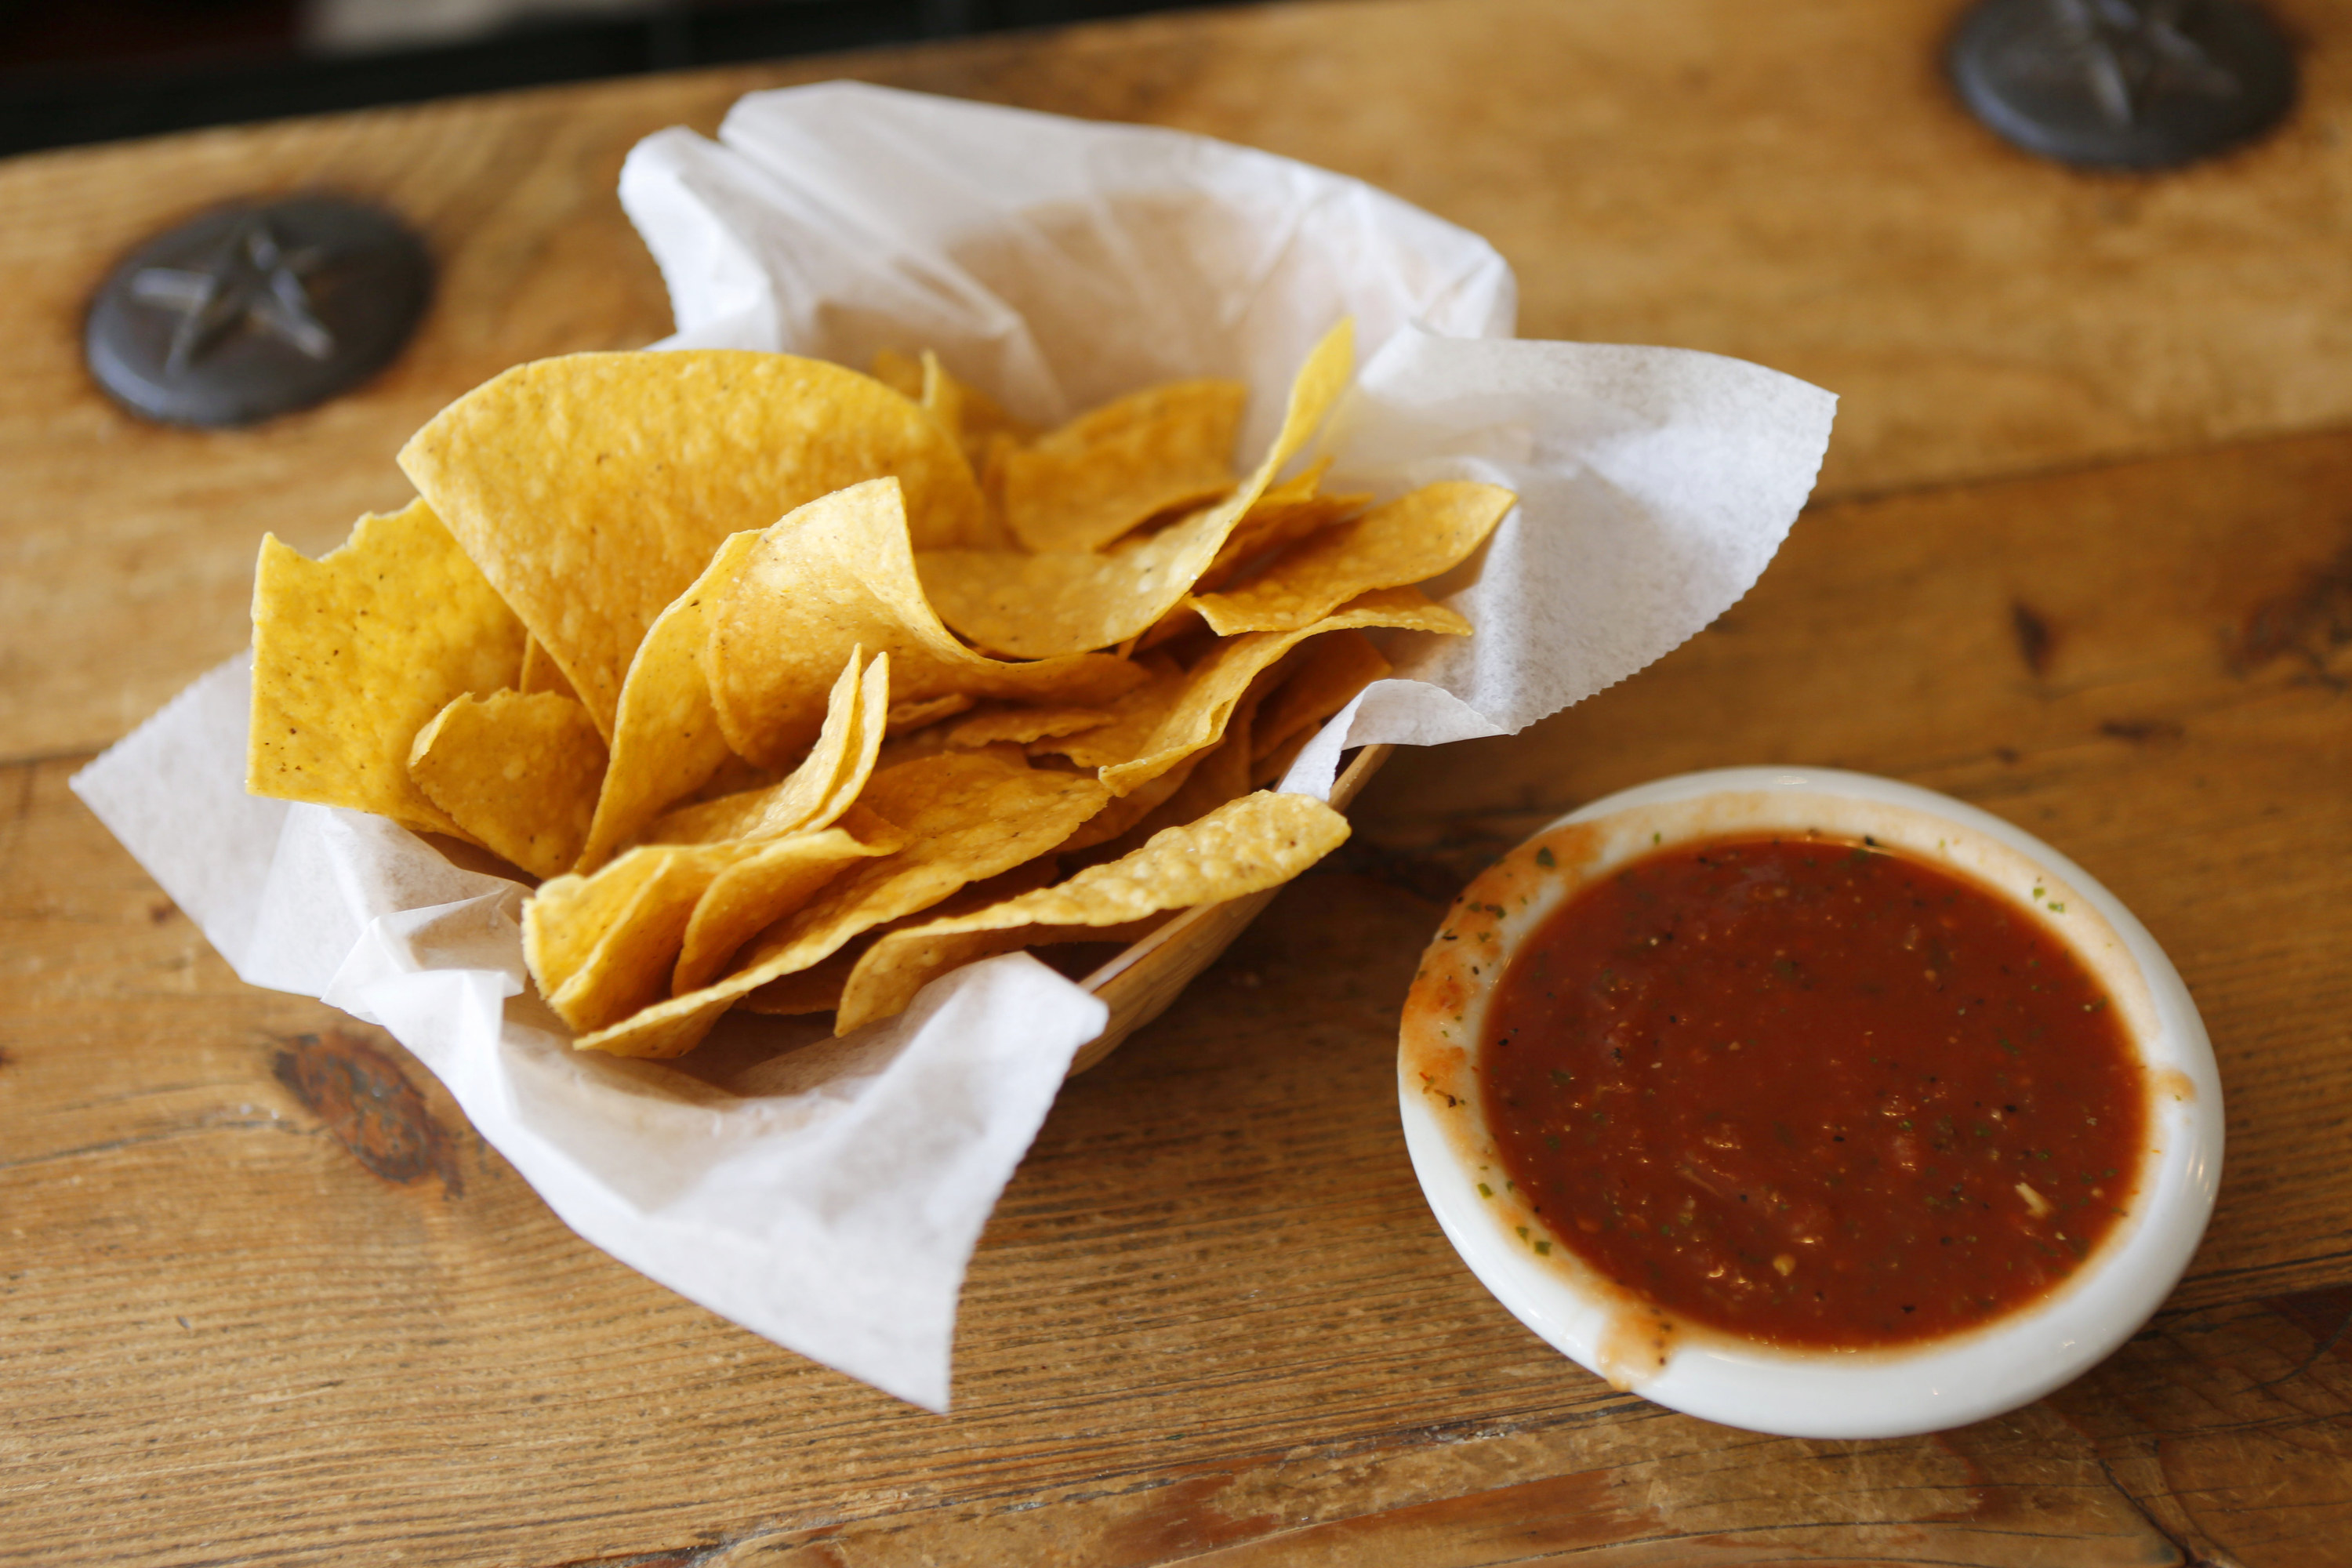 Basket of chips and a side of red salsa